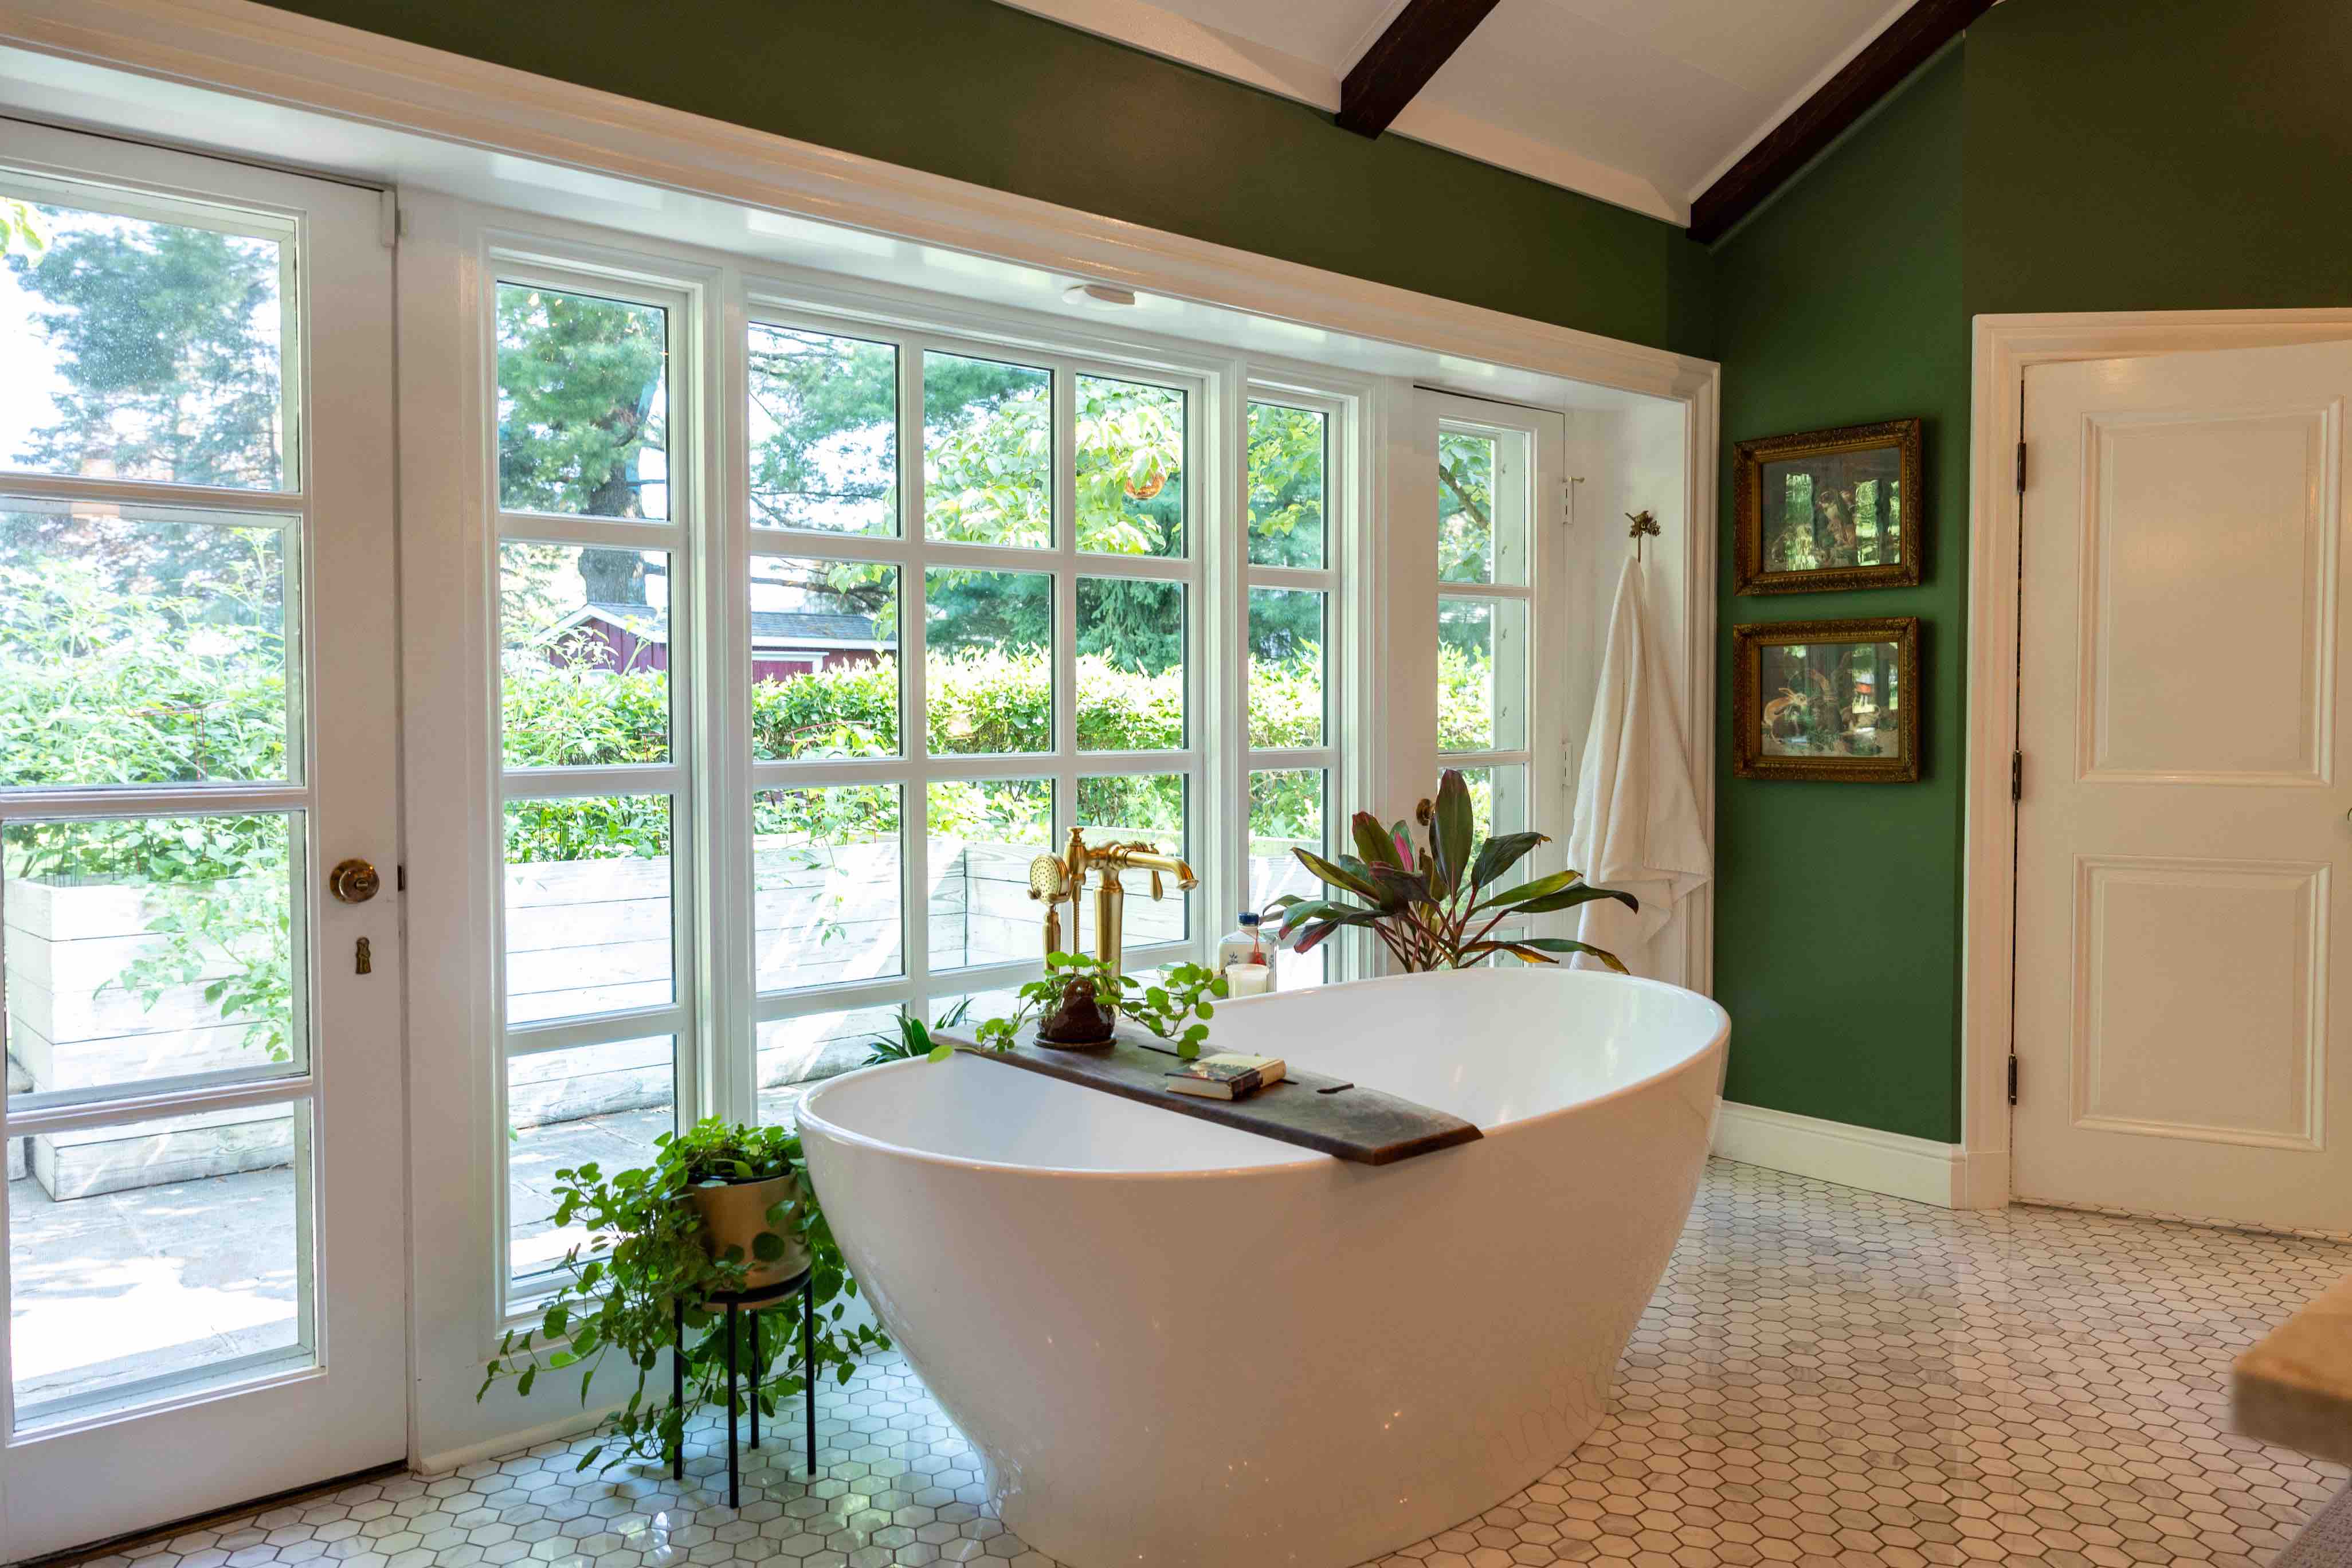 How Much Does a Bathroom Remodel Cost in Springfield and Decatur, Illinois?